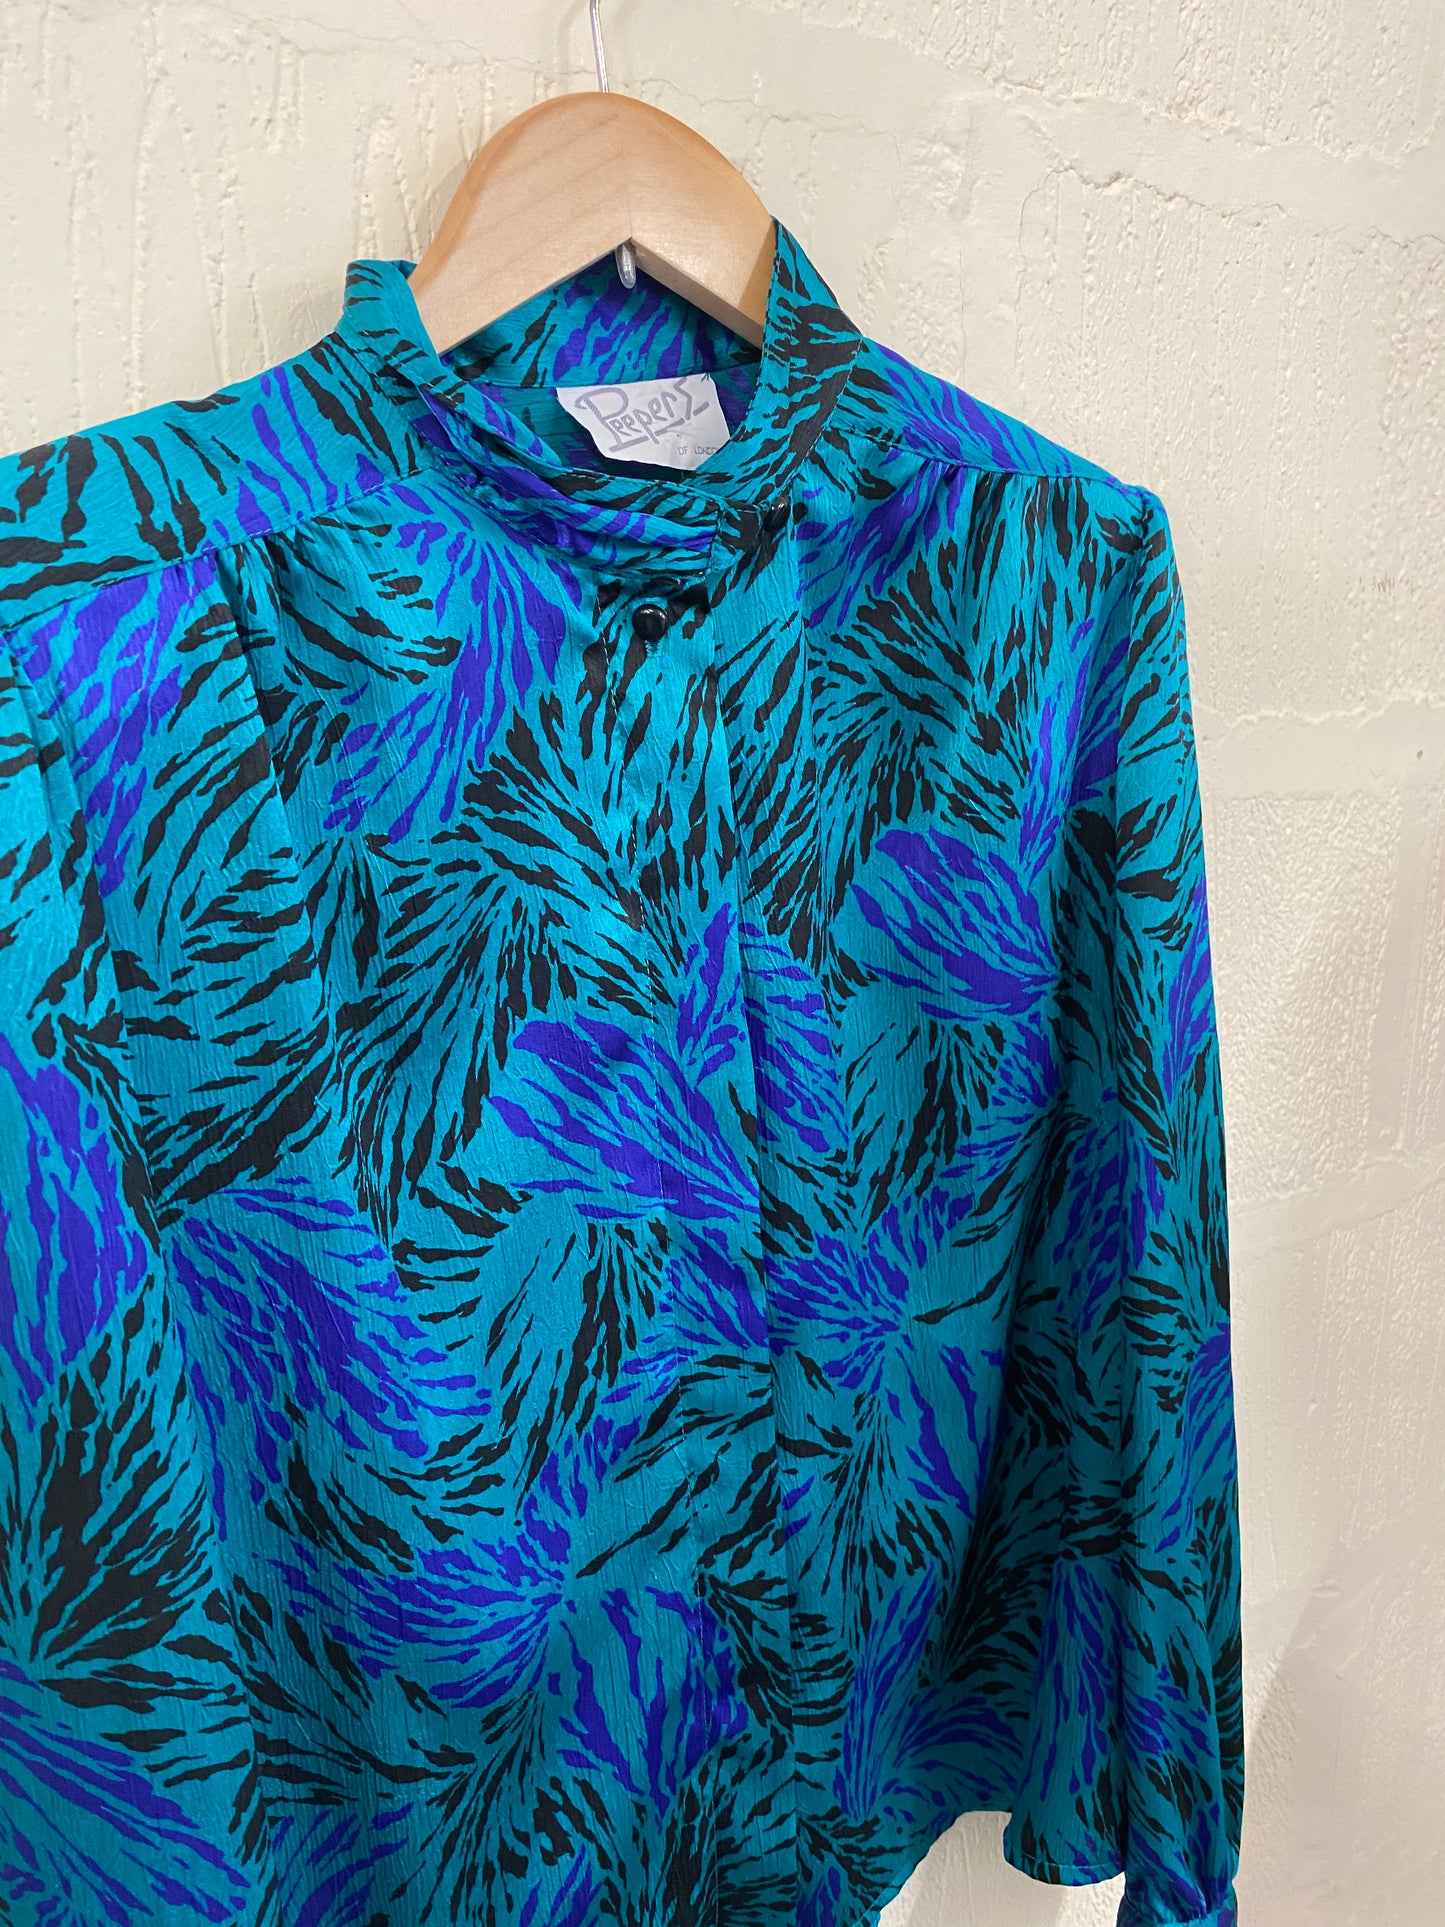 Vintage Teal and Blue 1980s Abstract Blouse Size 16